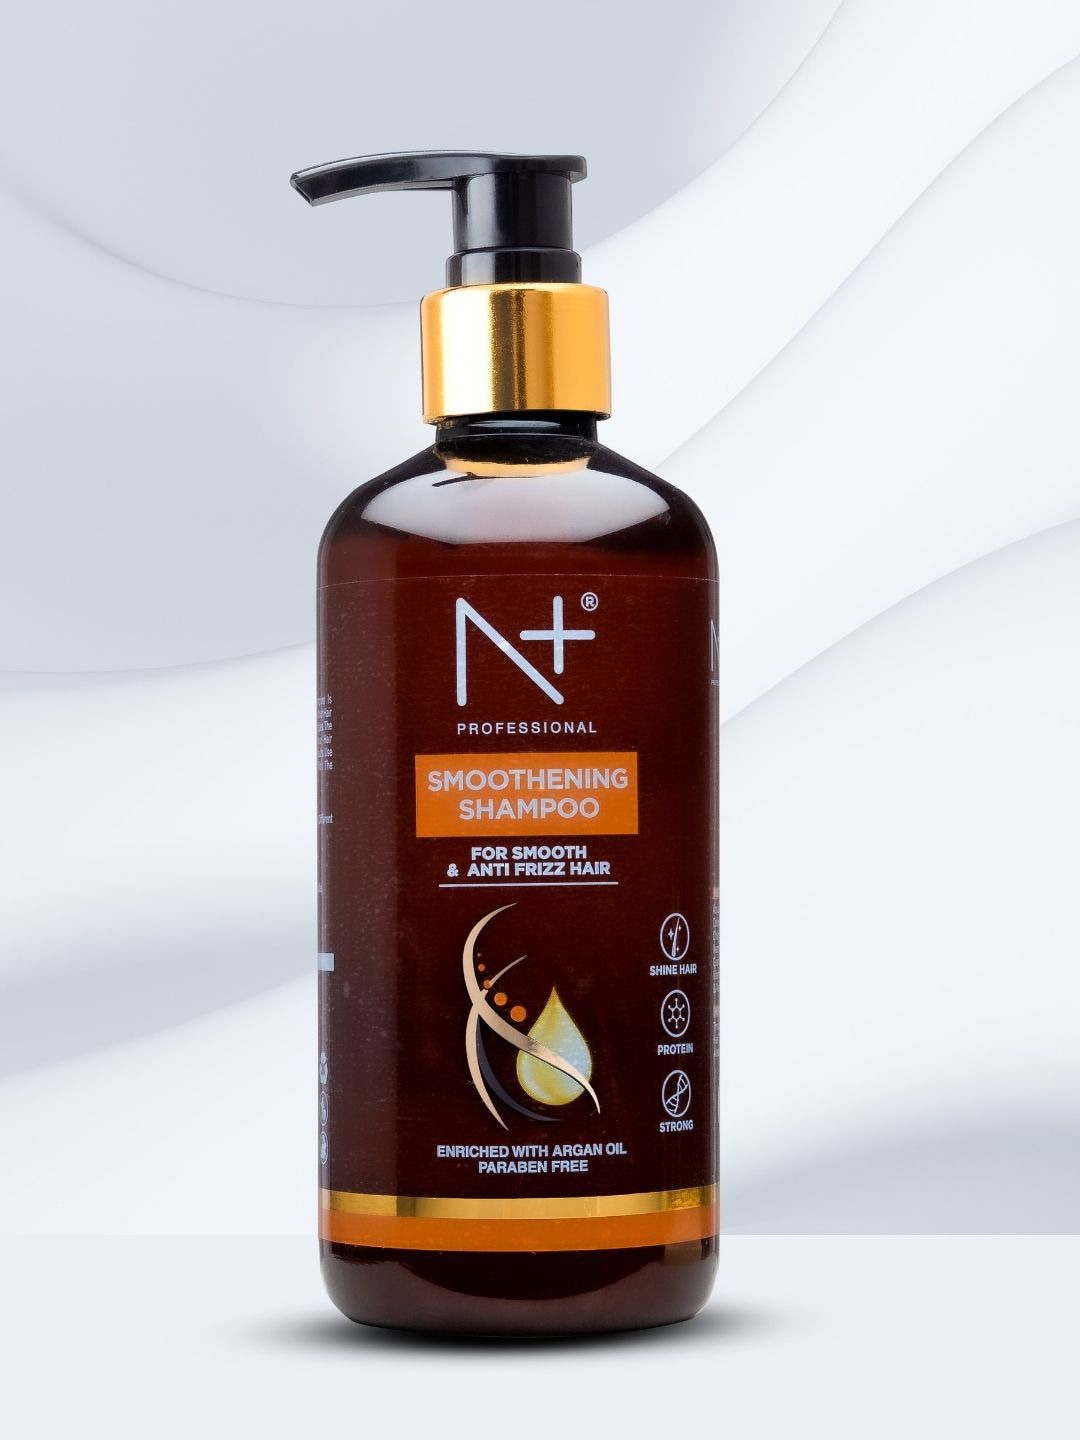 N Plus Professional Smoothening Shampoo with Argan Oil for Smooth Anti-Frizz Hair - 300ml Price in India